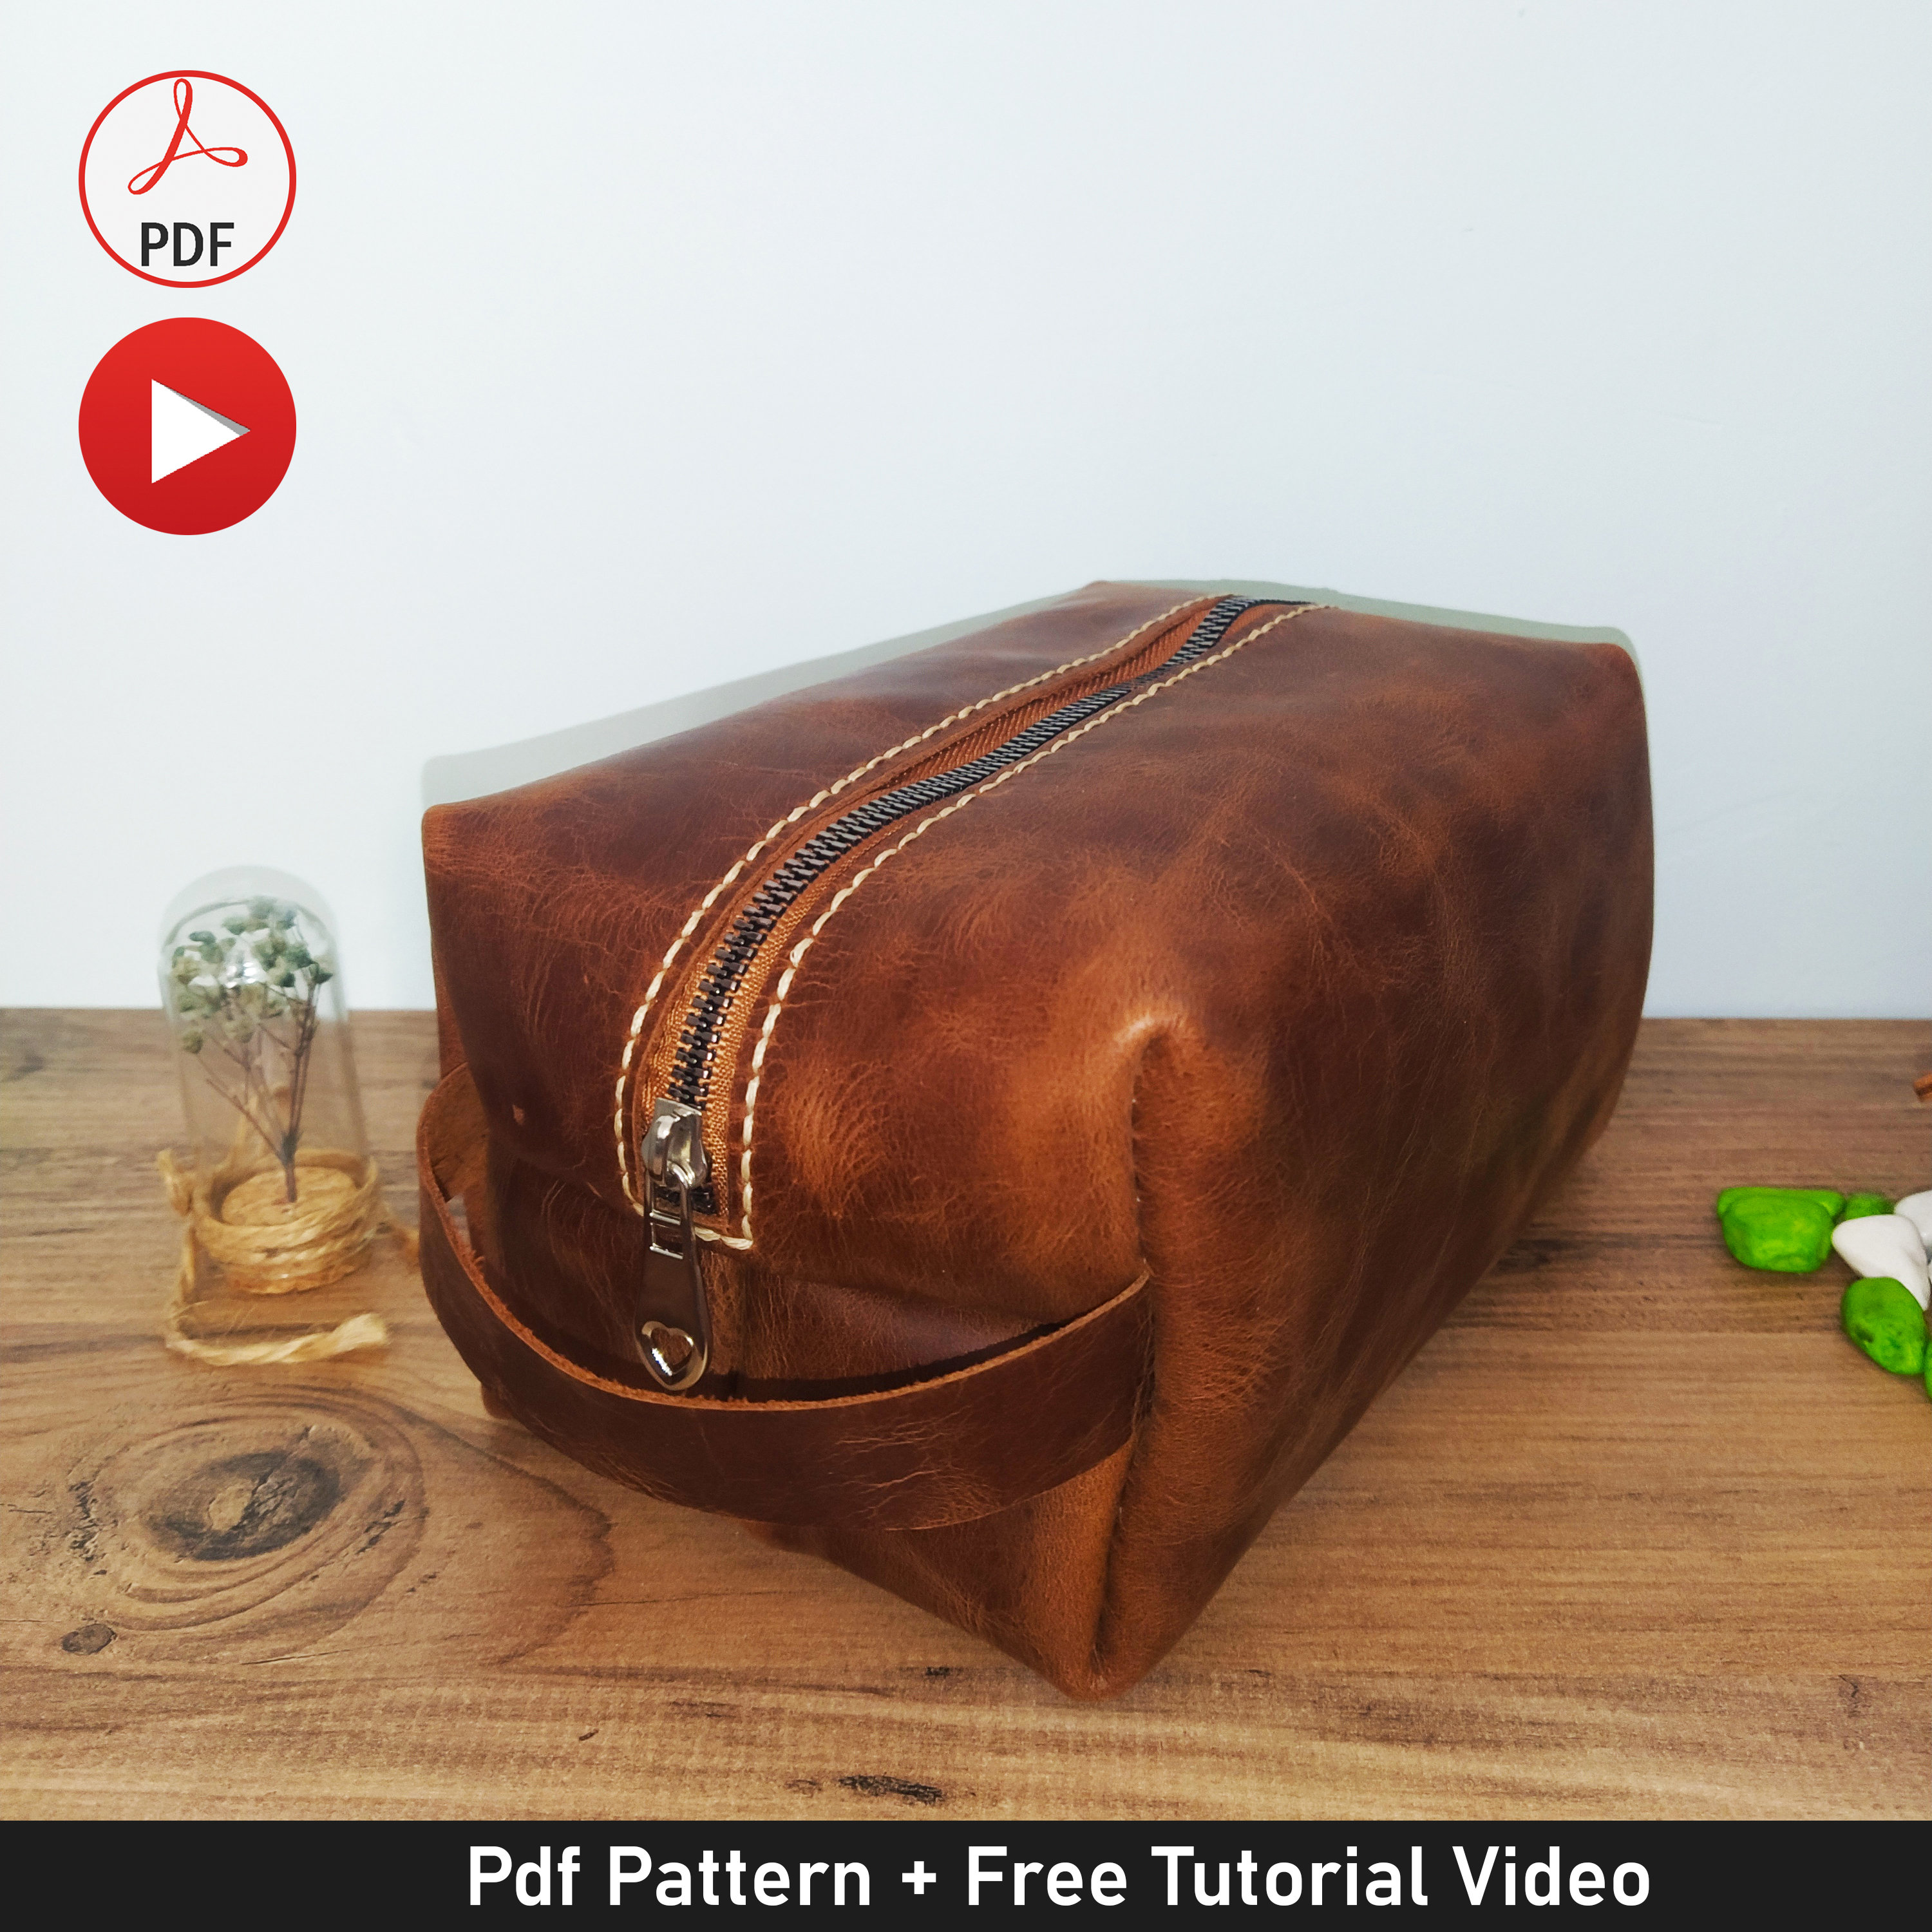 Bree's Box Toiletry Caddy - Comprehensive Video Class